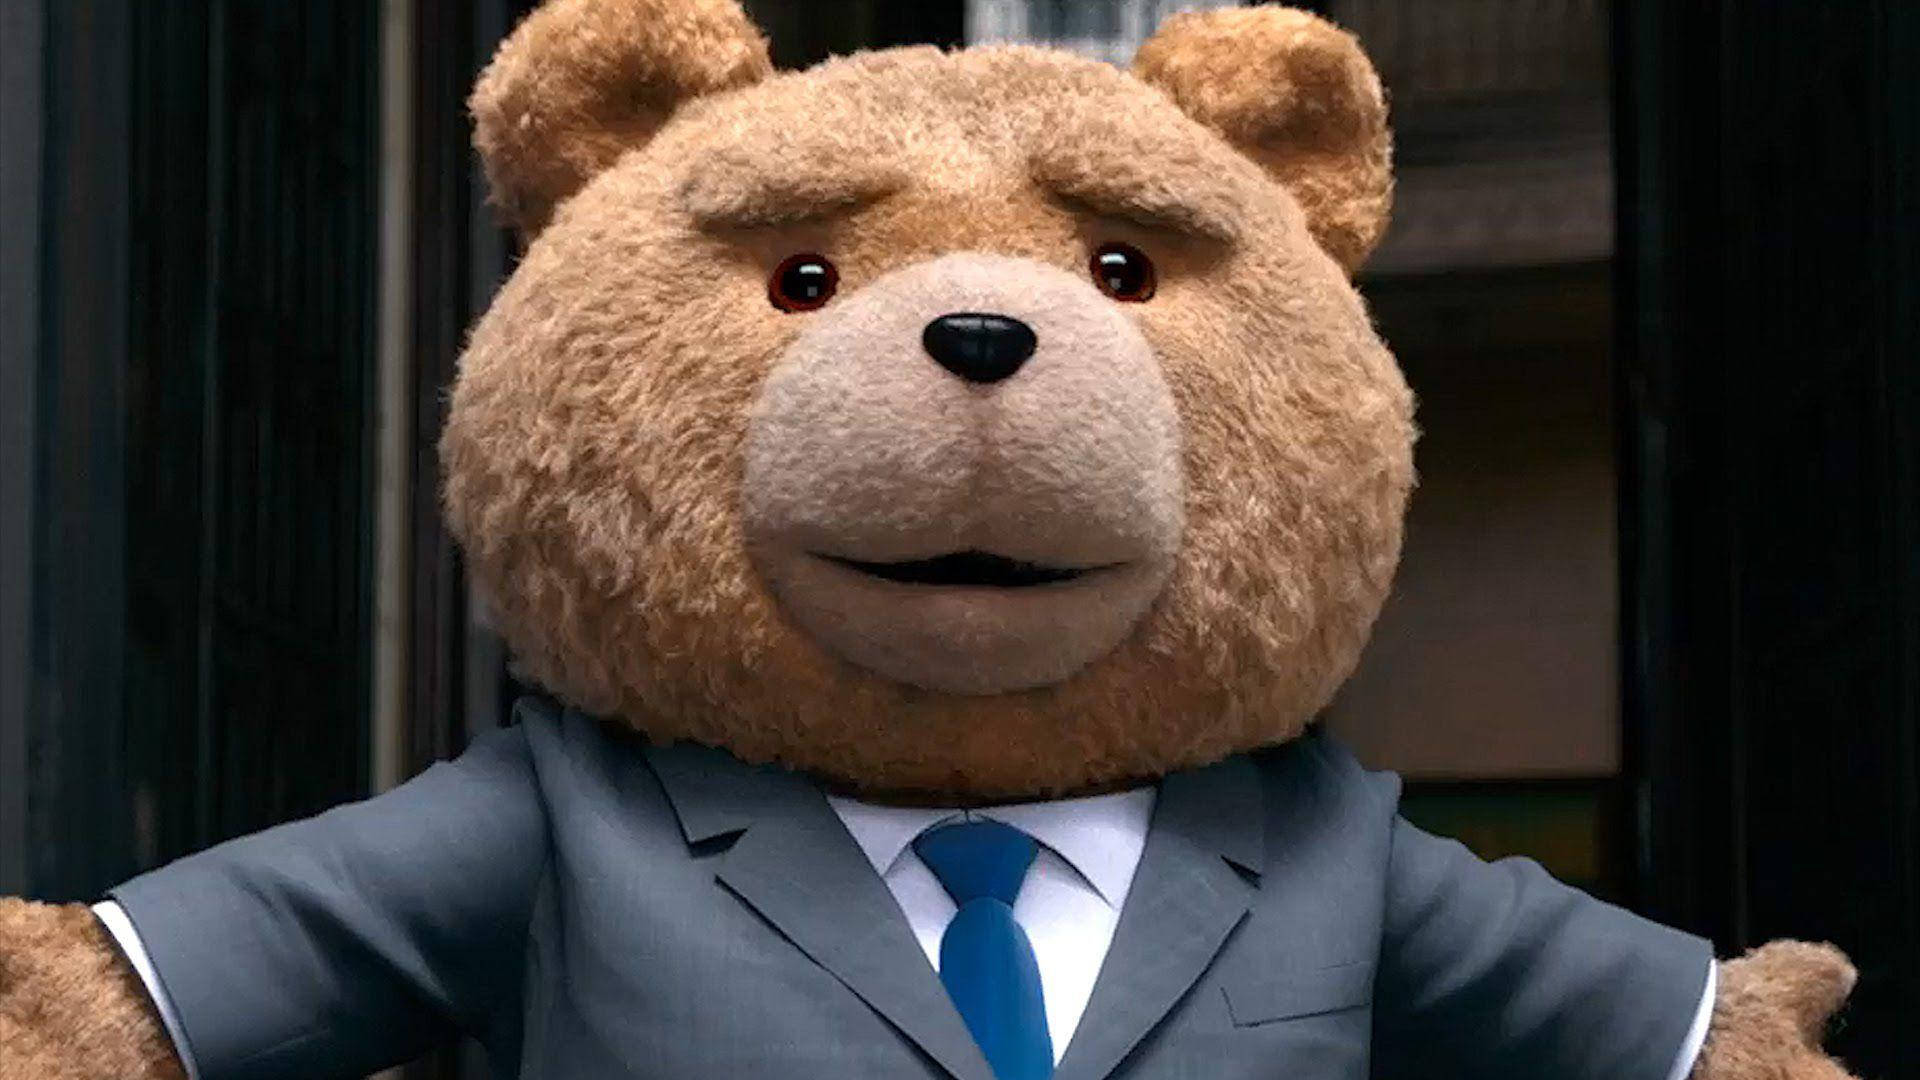 Ted In A Suit